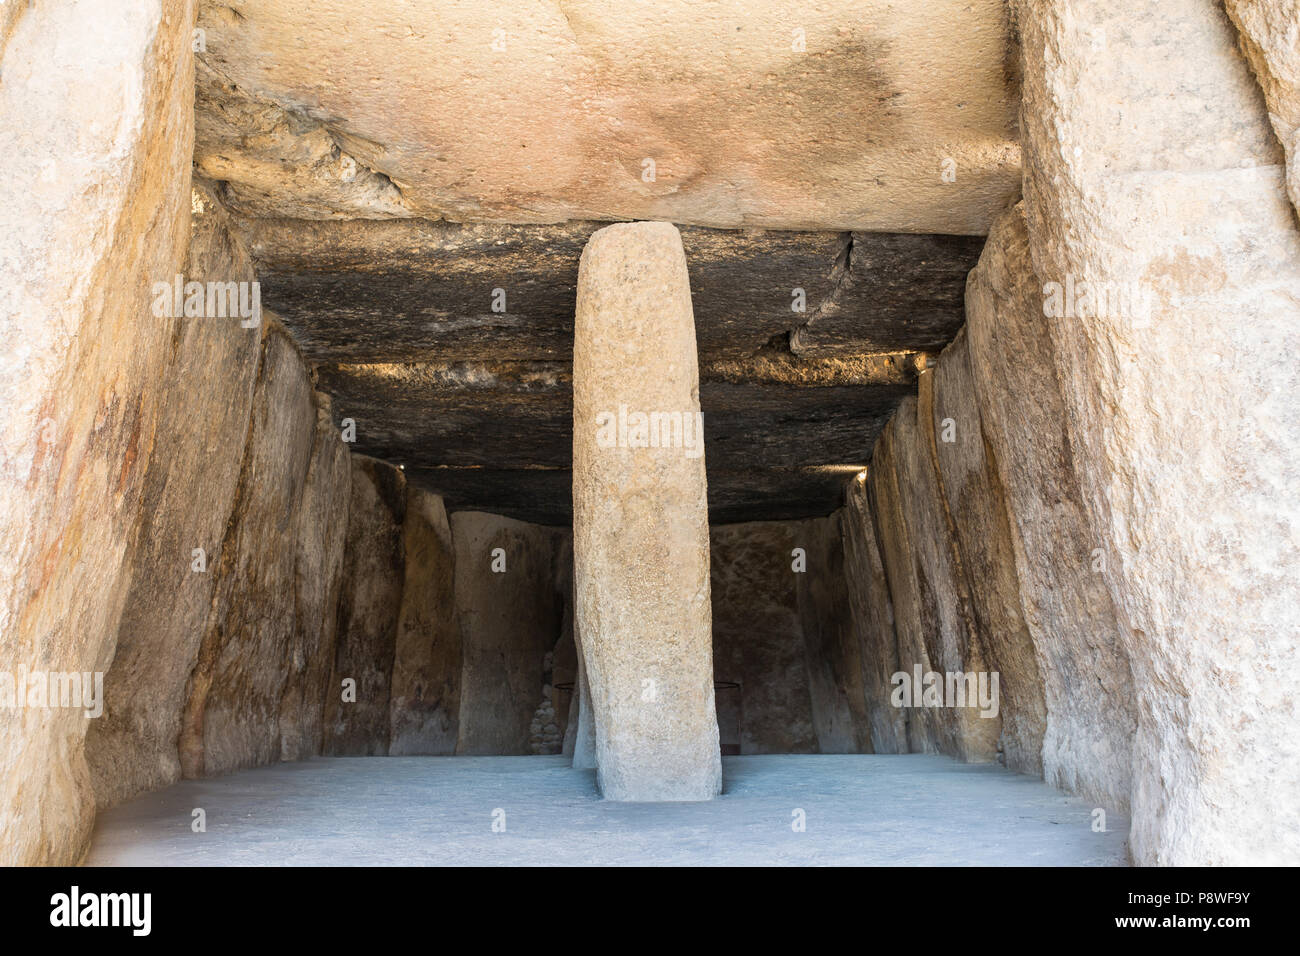 Antequera, Spain - July 10th, 2018: Dolmen of Menga chamber, Antequera. First pillar orthostat Stock Photo